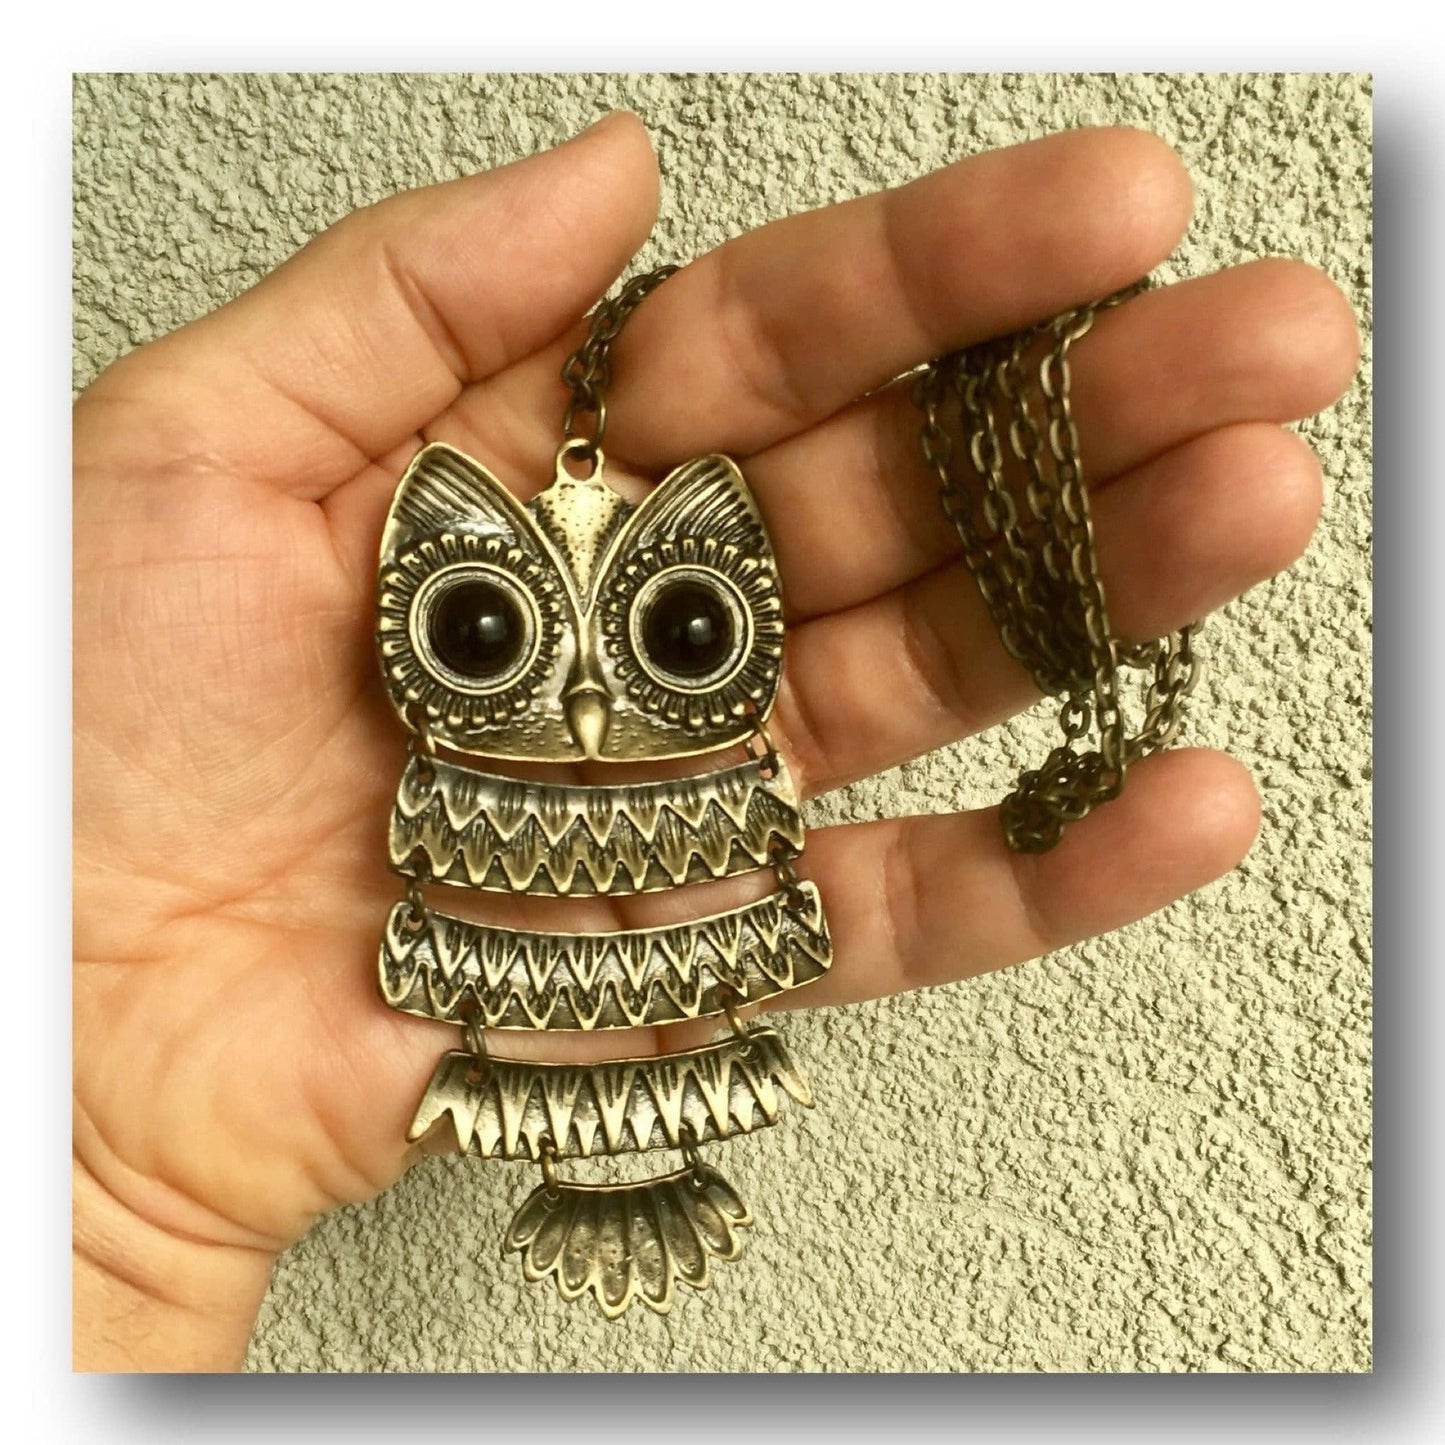 Owl Pendant Necklace Black Eyes Masterfully Articulated